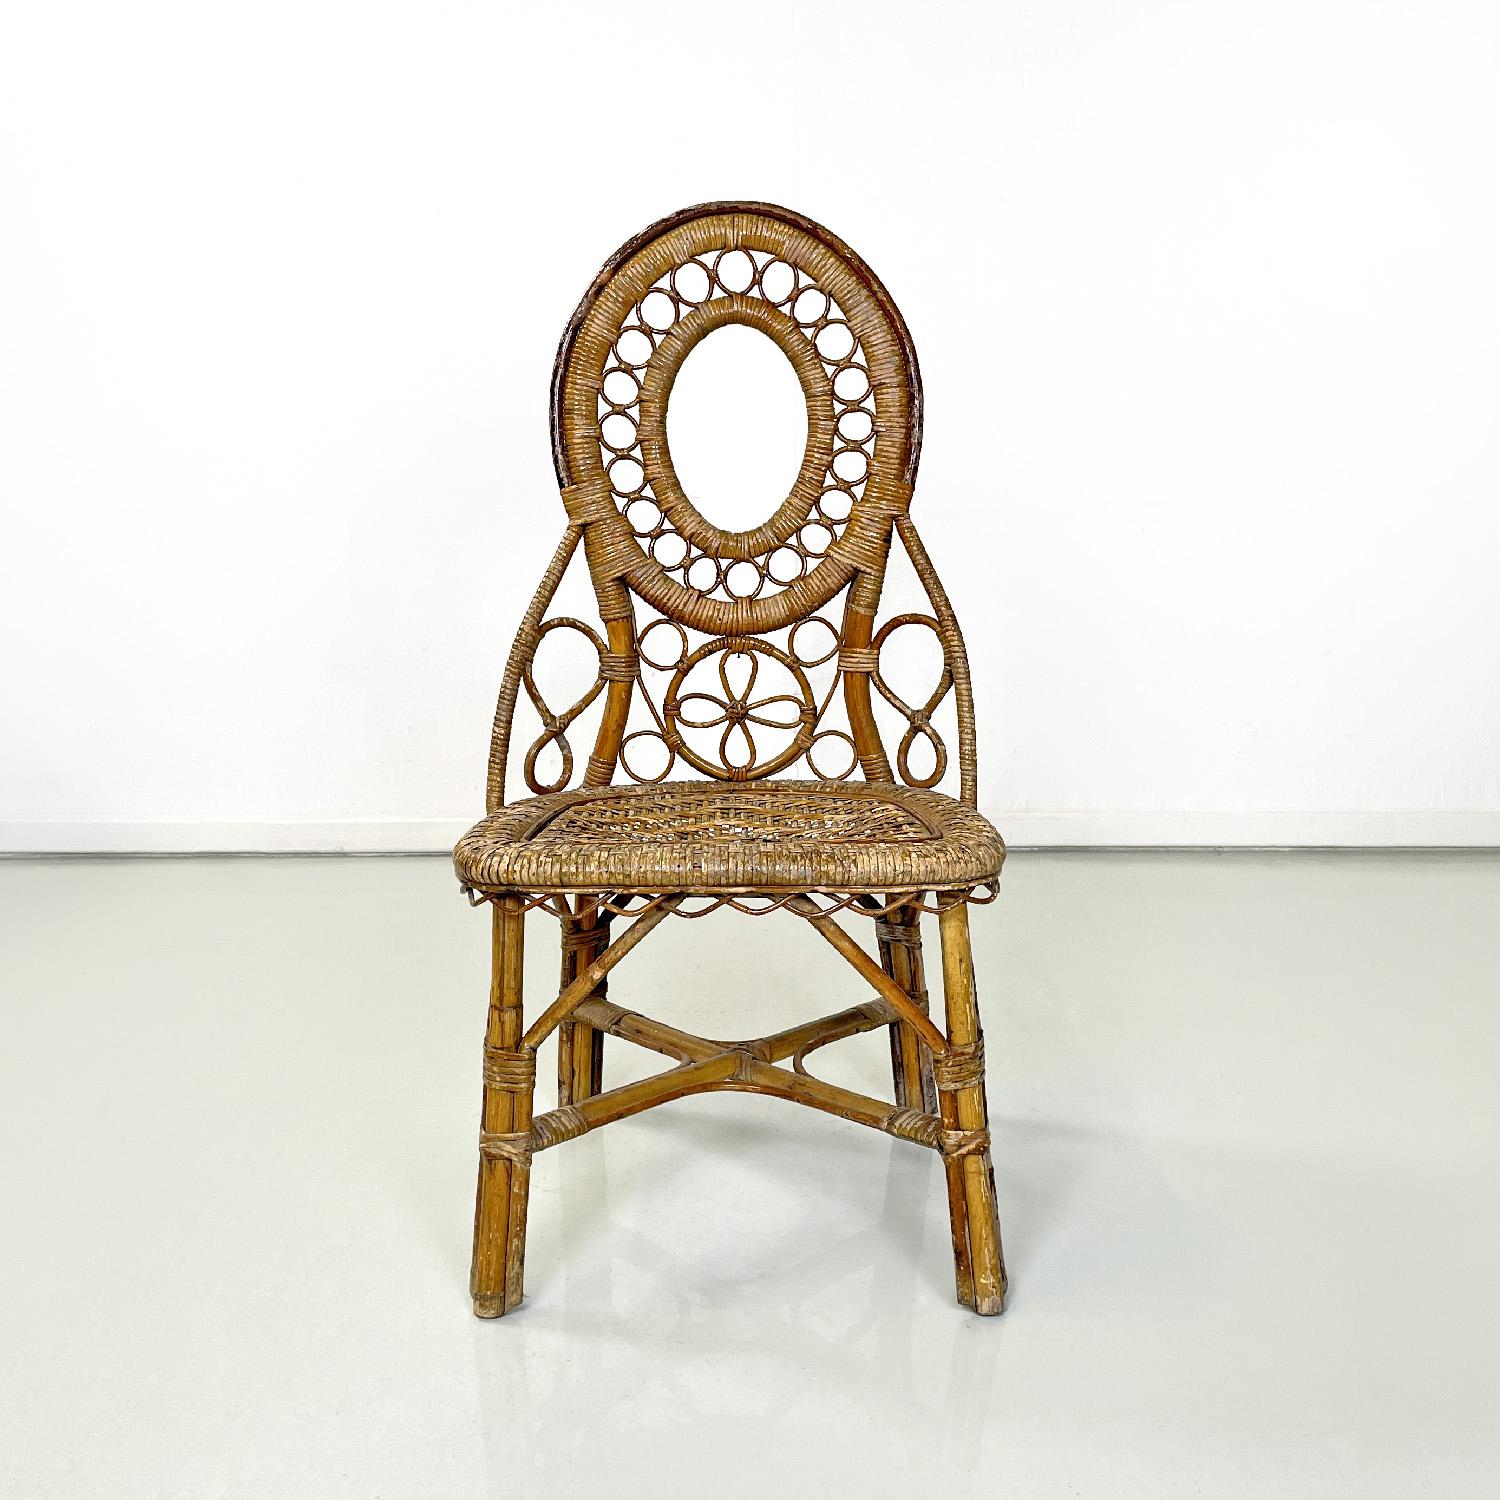 Italian antique rattan chair with floral and geometric decoration, early 1900s
Rattan chair with backrest finely decorated with rounded and floral shapes. The seat has a geometric weave and a rounded profile, the four legs are joined in the center